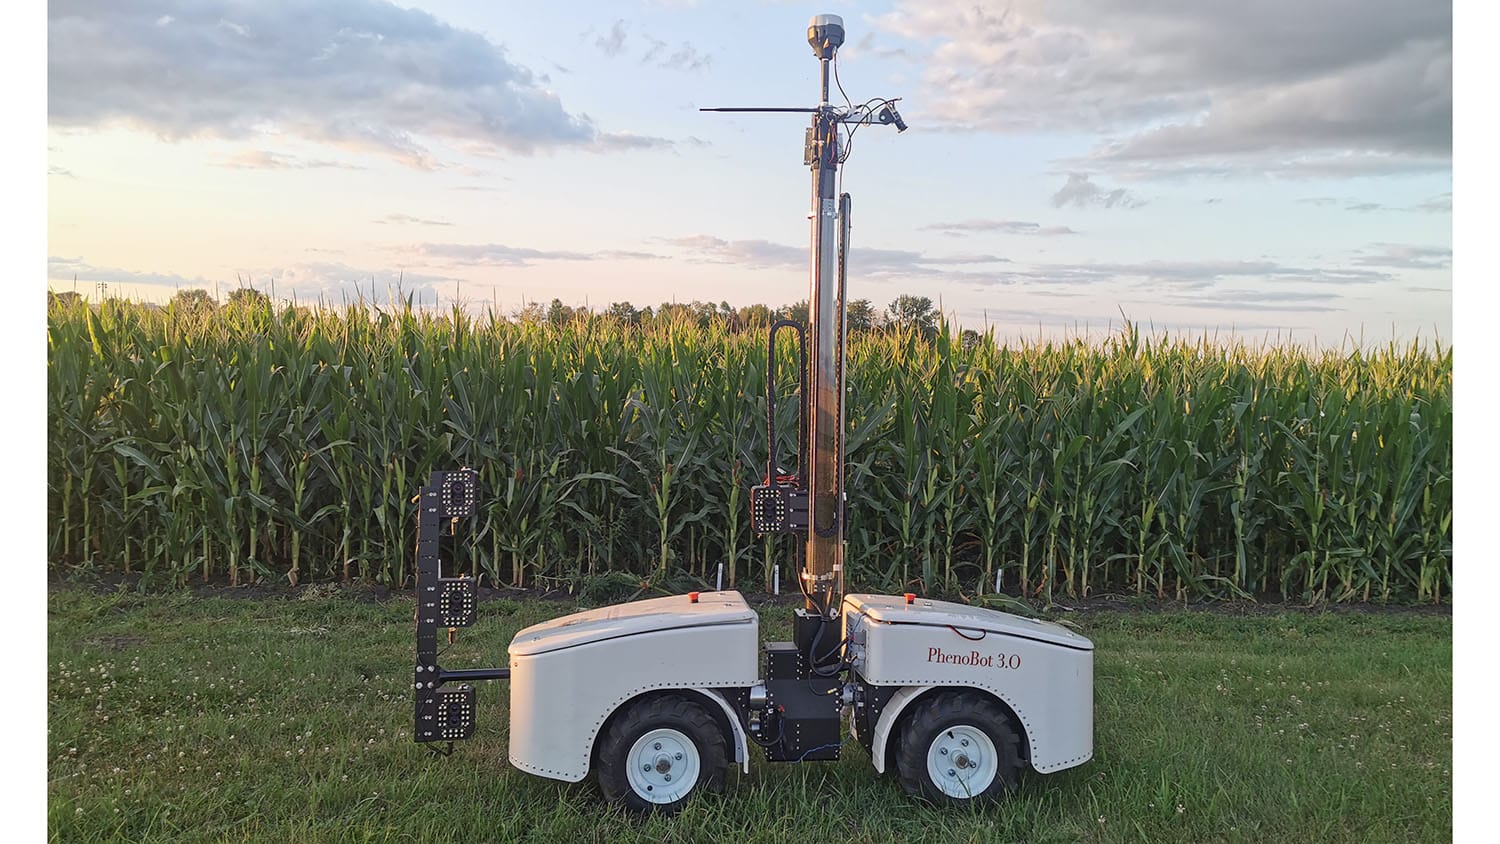 wheeled vehicle contains a tower with multiple tiers of cameras mounted to it. The vehicle is in a corn field.